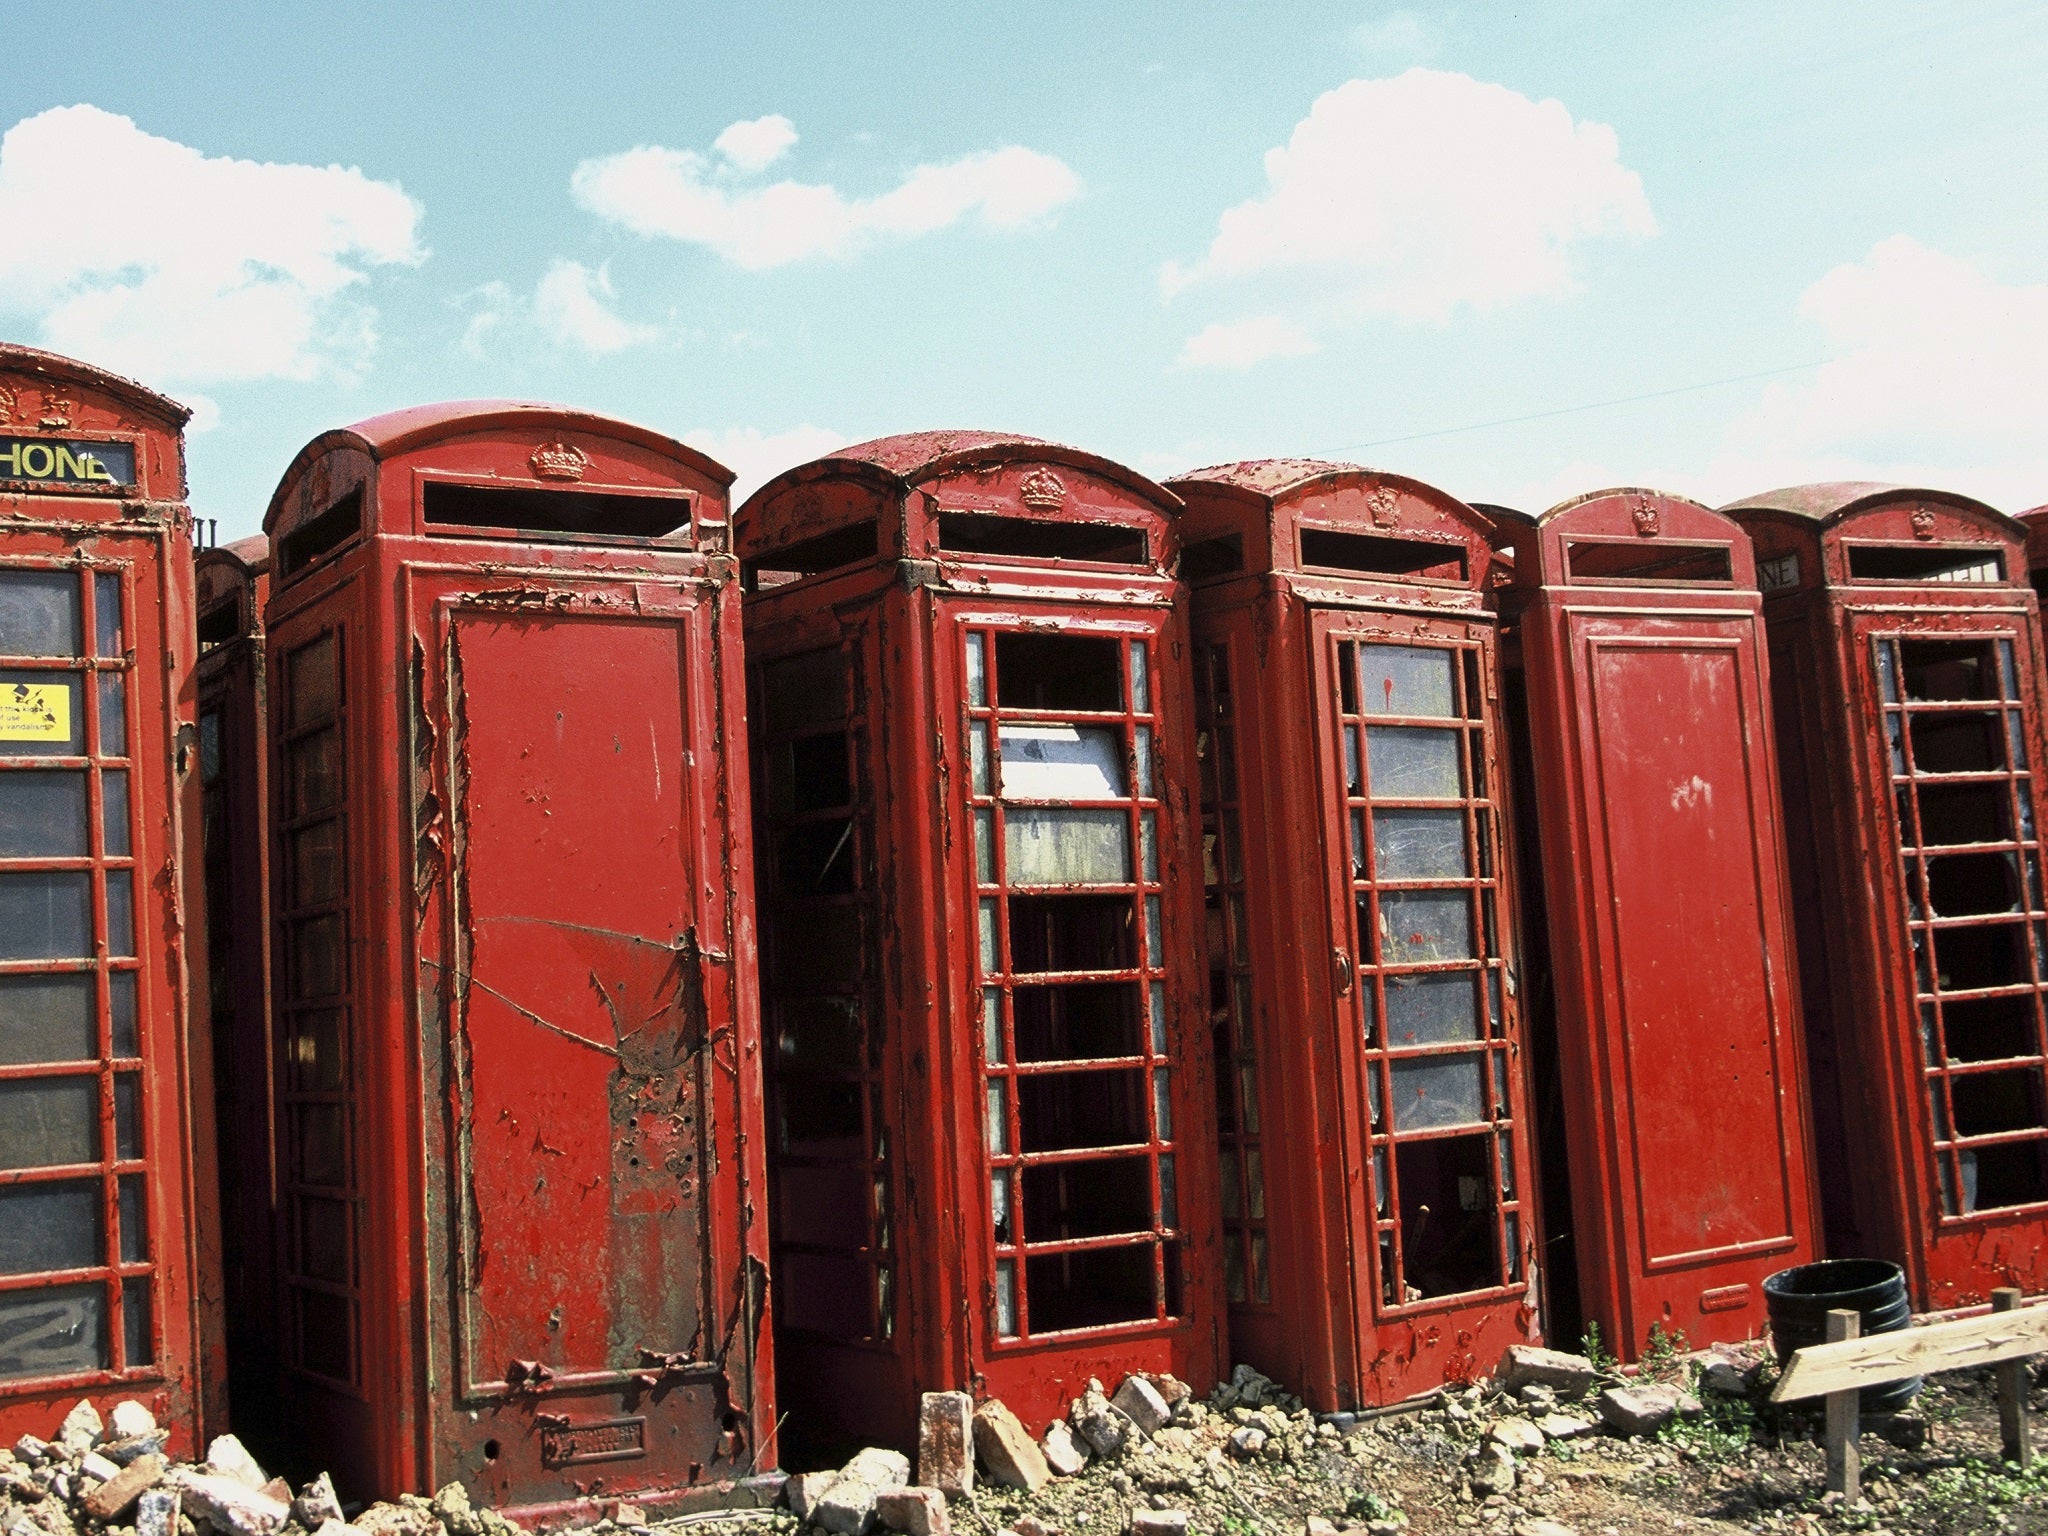 Old phoneboxes abandoned on scrapyard